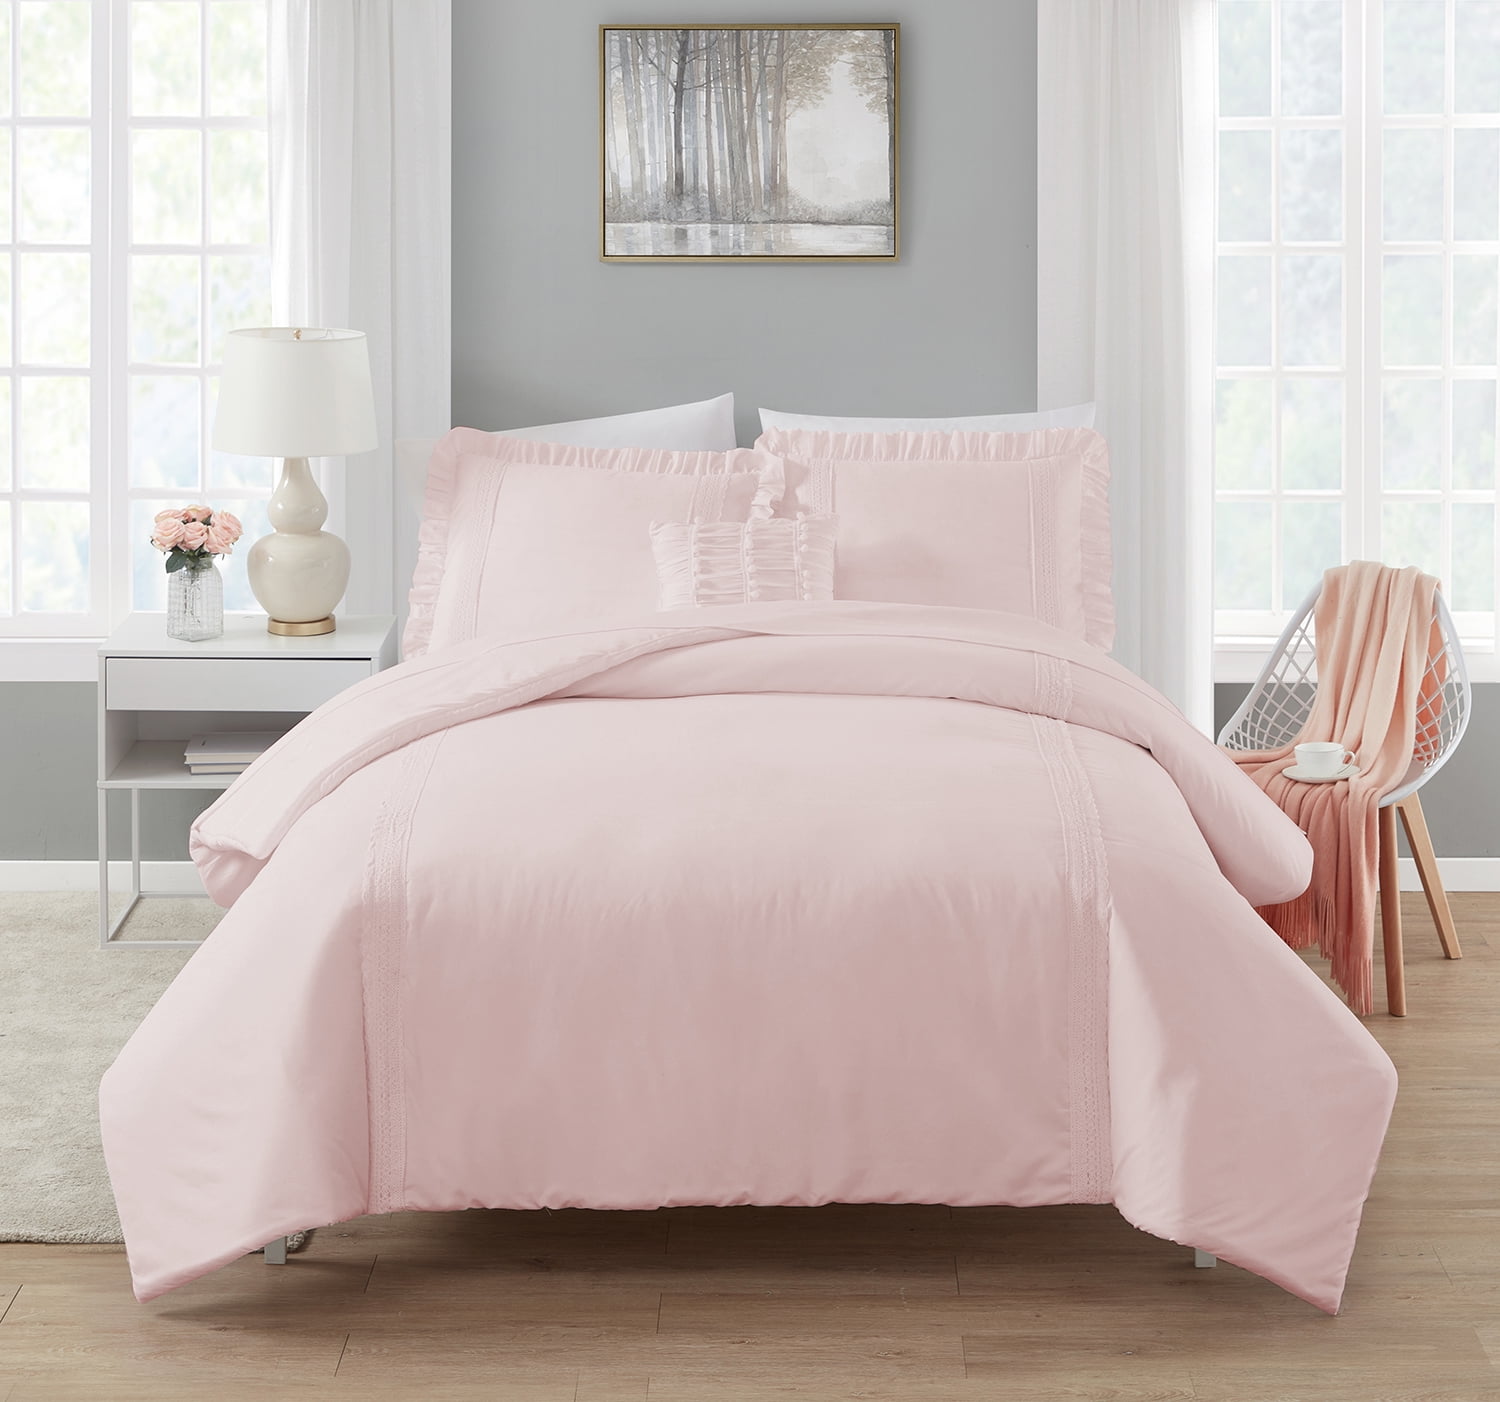 Simply Shabby Chic Pink Crochet Stripe 4 Piece Washed Microfiber Comforter Set Full Queen